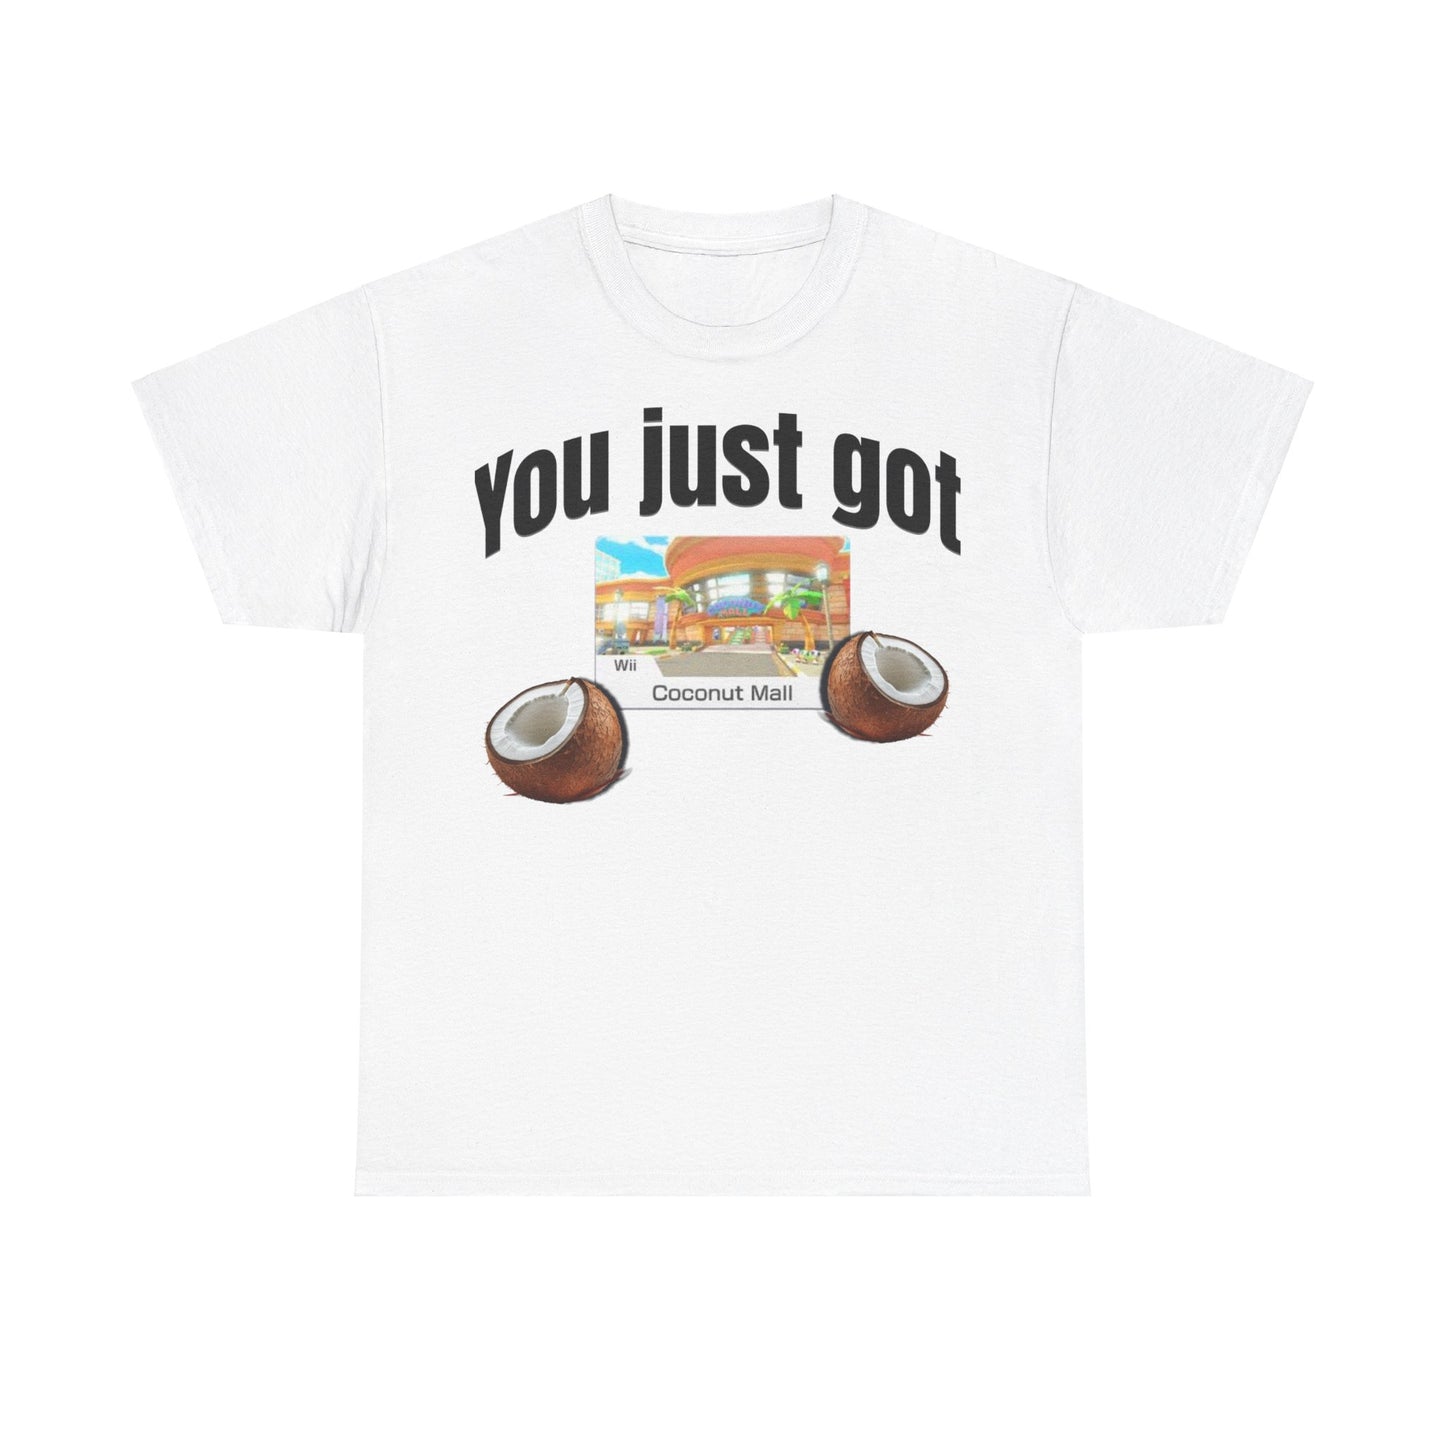 Coconut Mall Tshirt by Wii Mario Cart T-Shirt Gift for men and woman, Suprise Wii Shirt, Mario Cart Coconut Mall Present, Wii fans, Funny T-Shirt, funny meme shirt, cool stylish meme shirt for boys, perfect present for boyfriend or son, You just coconut malled tiktokt meme, rickrolled coconut mall meme